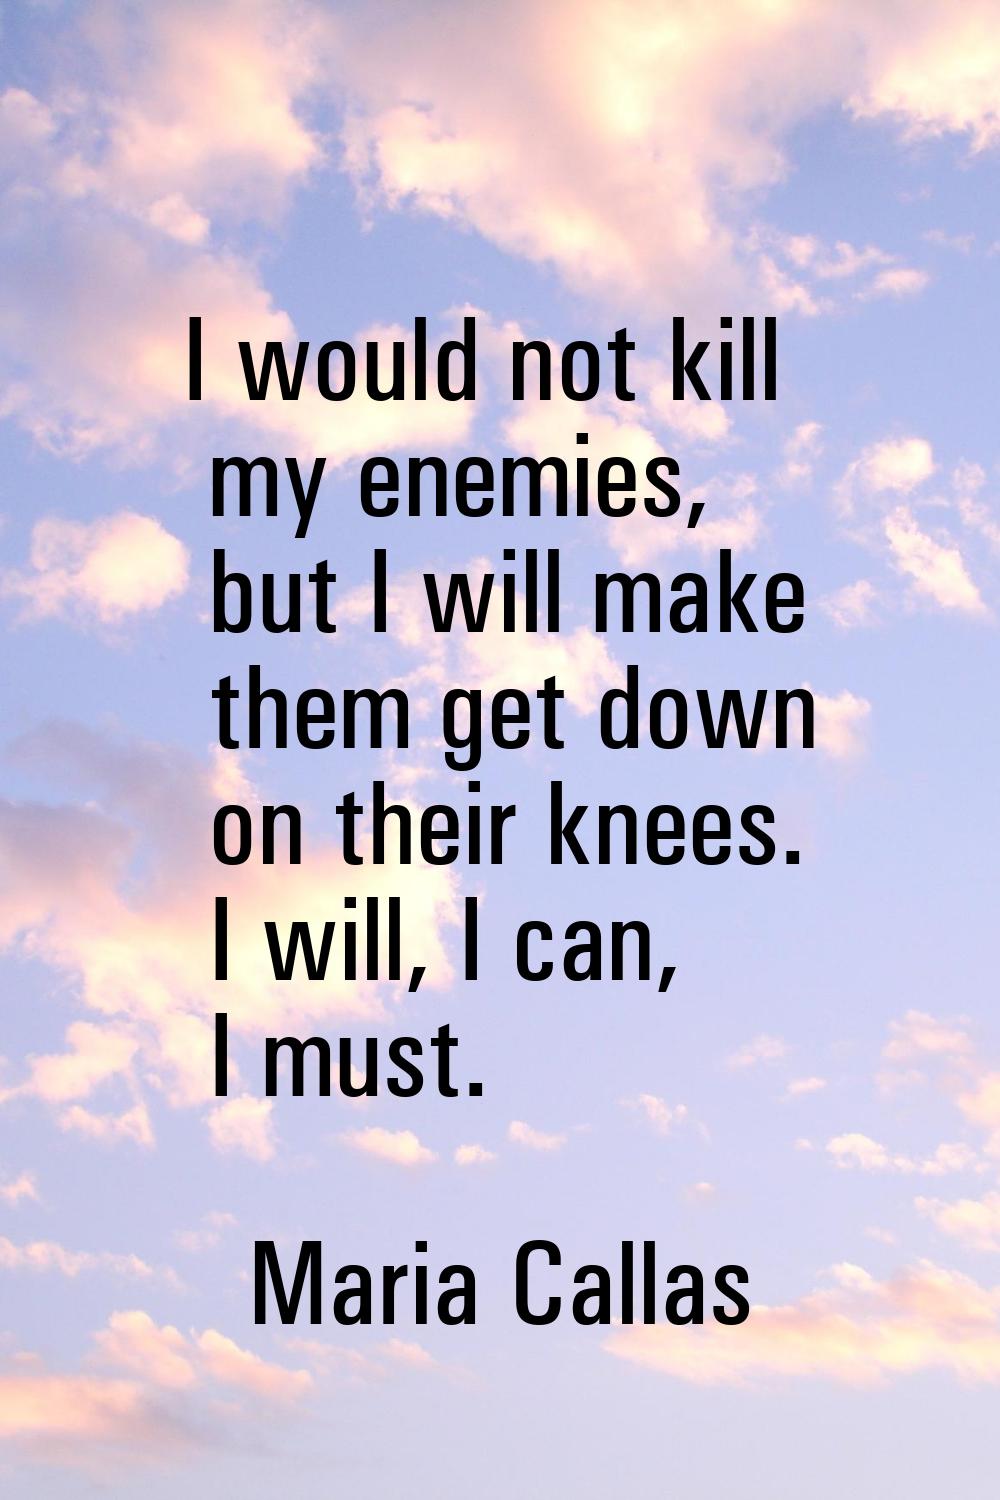 I would not kill my enemies, but I will make them get down on their knees. I will, I can, I must.